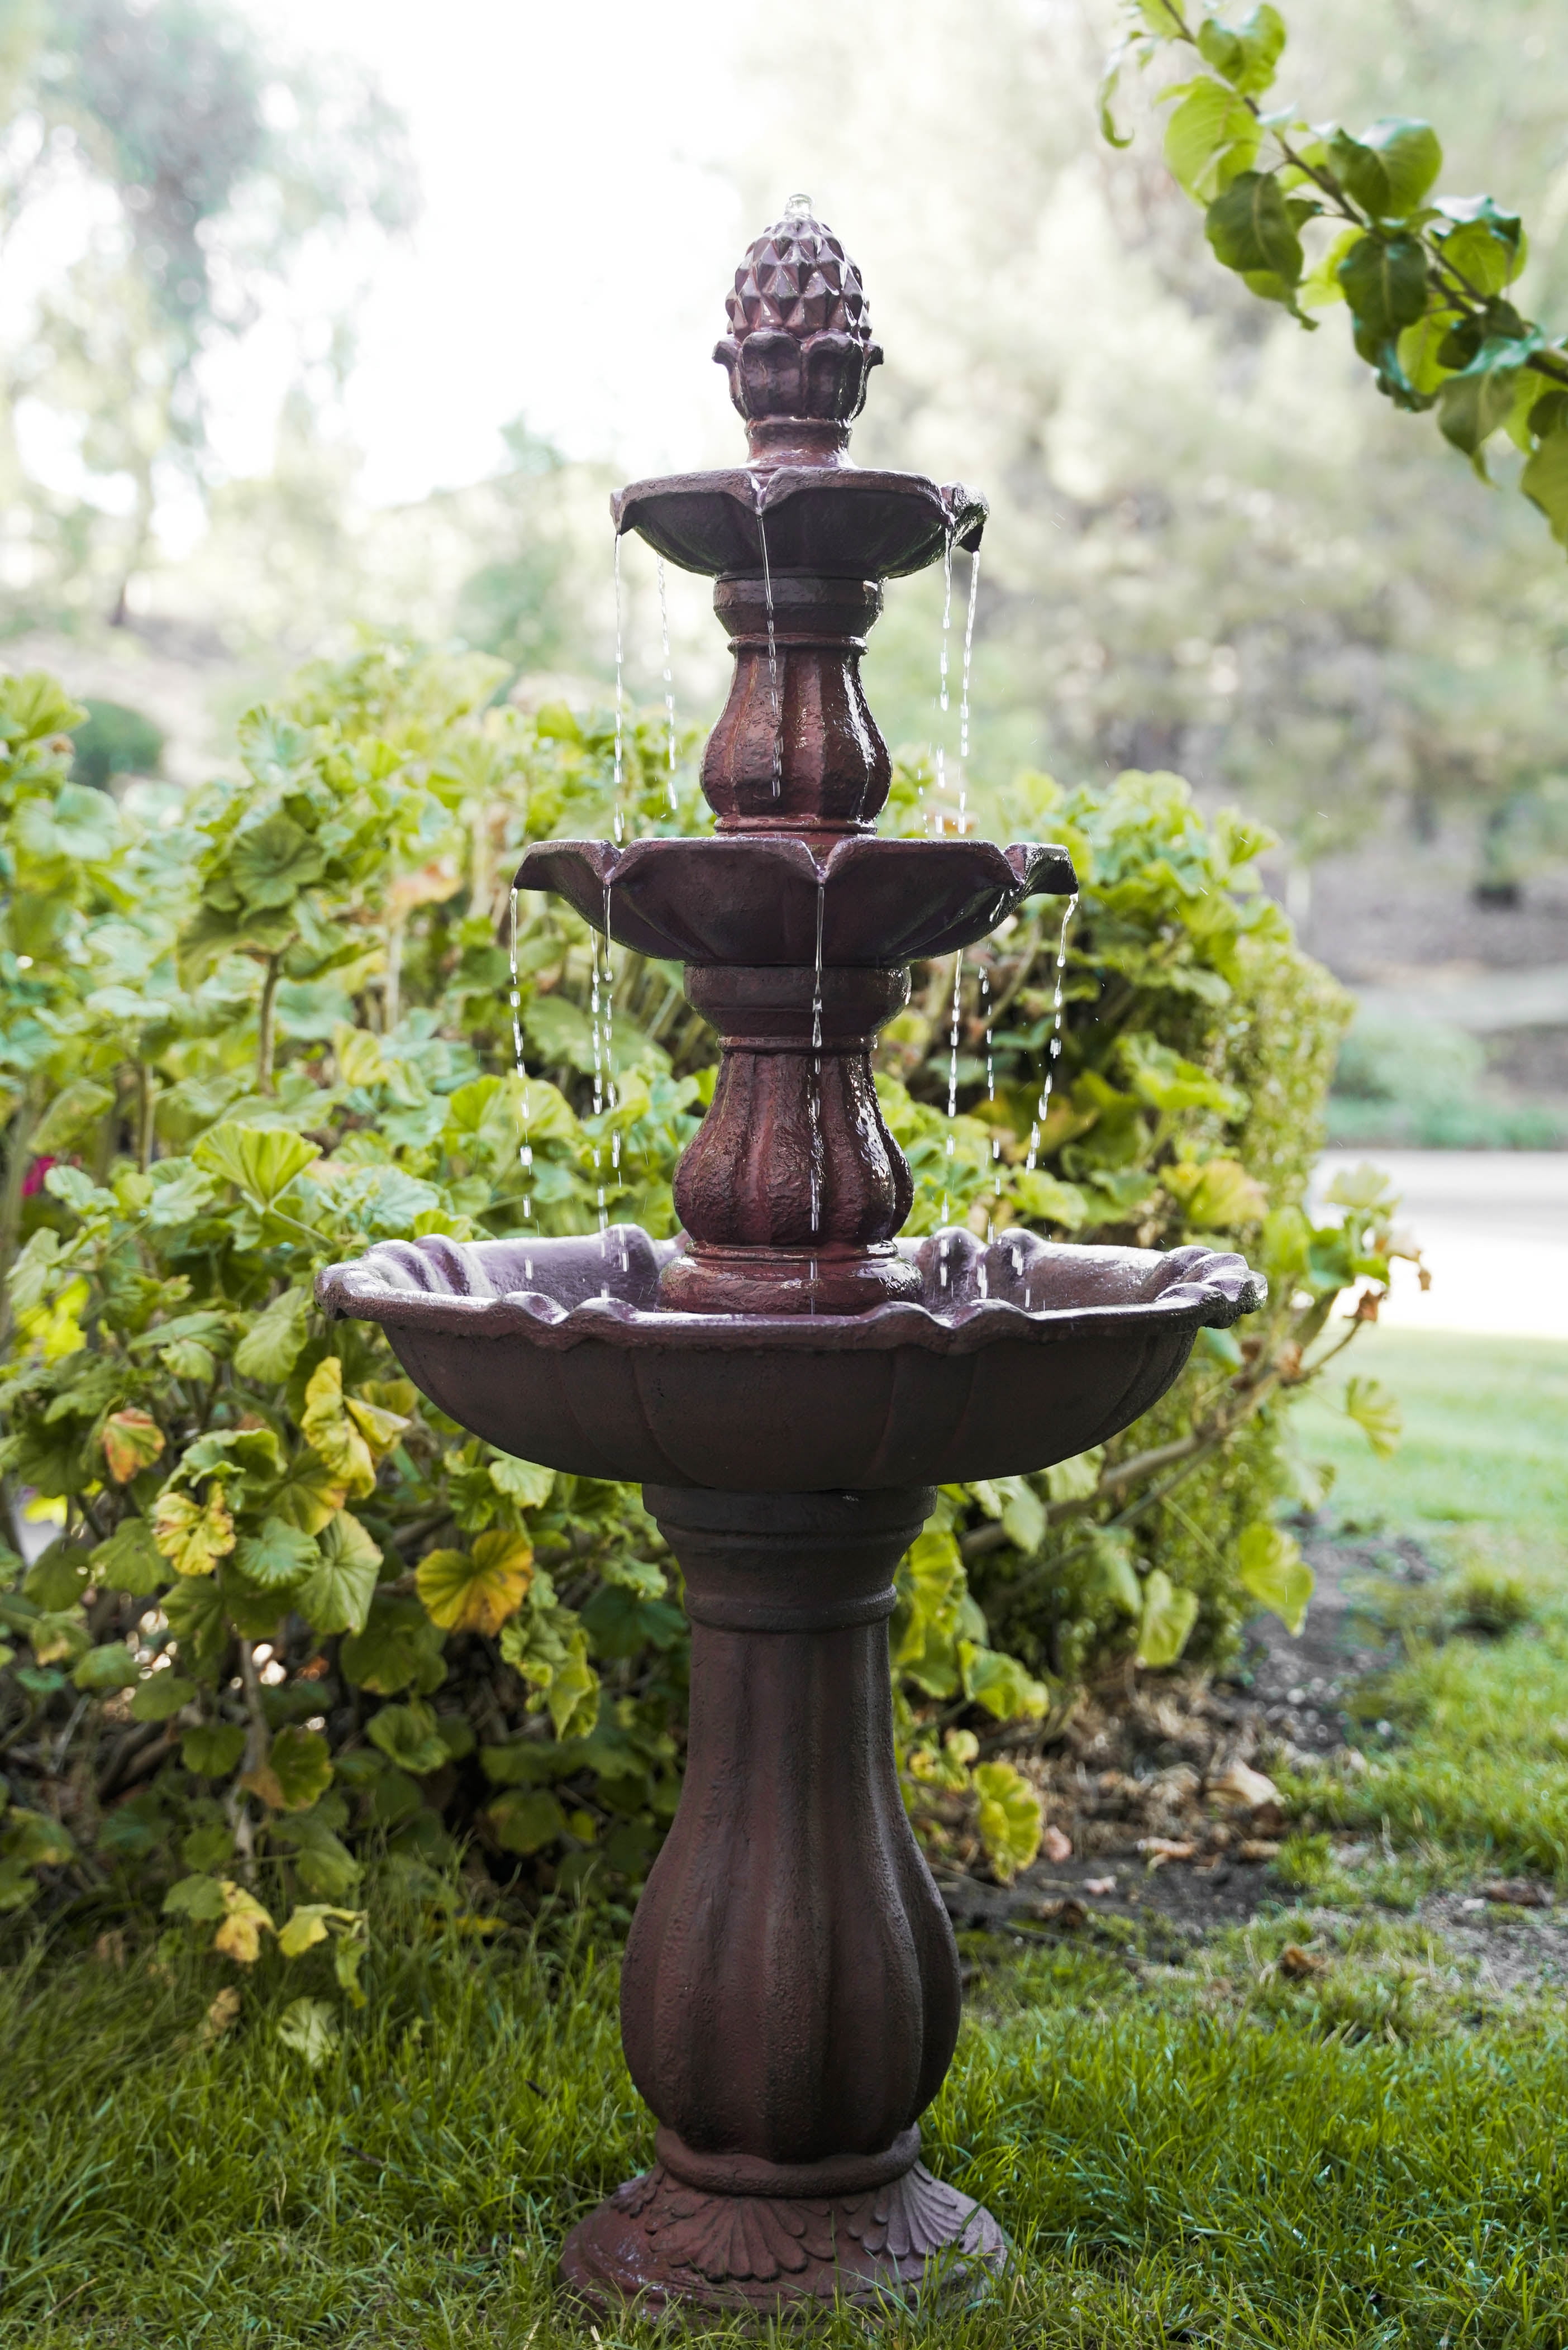  garden fountains and waterfalls